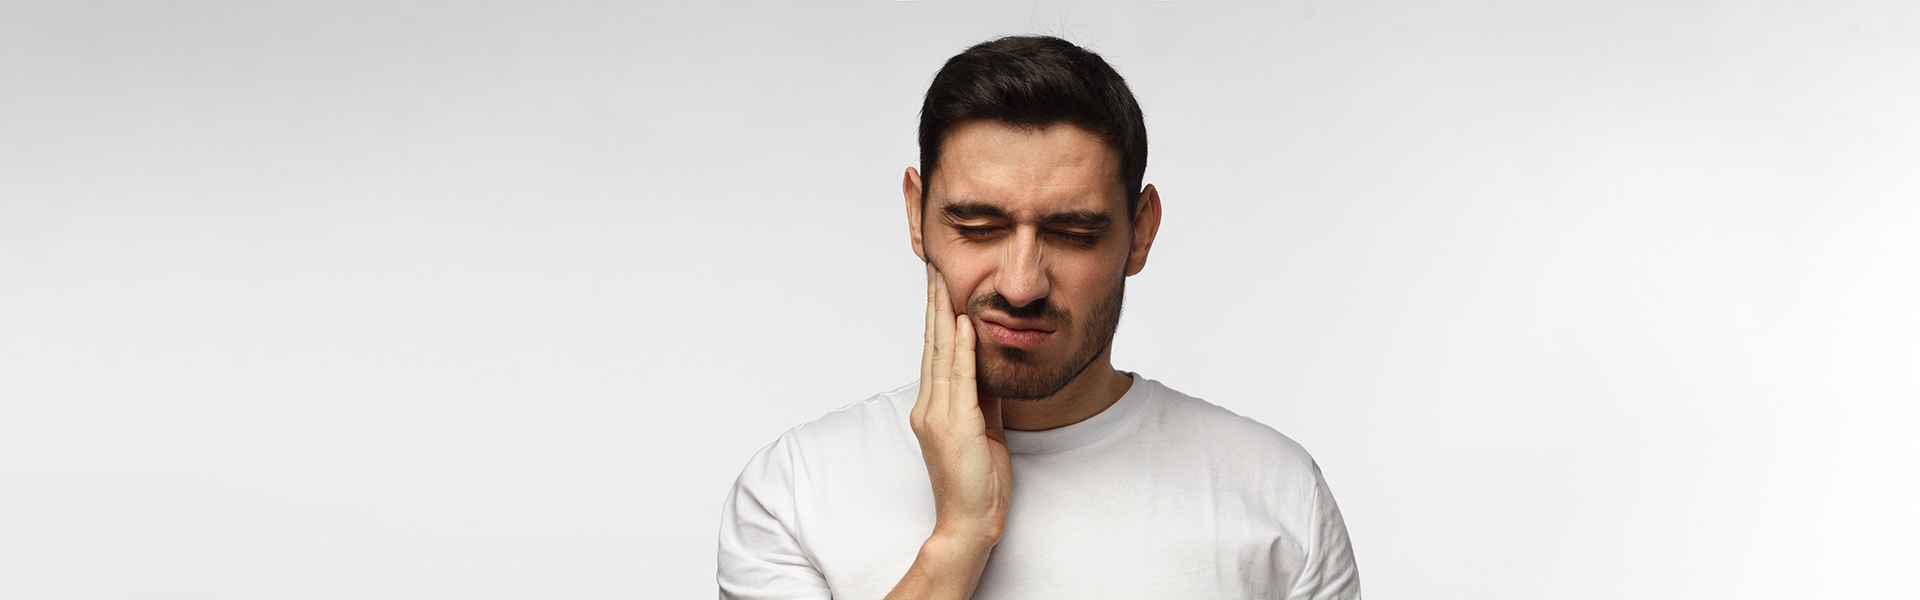 Overcoming Dental Anxiety Is Easy with Sedation Dentistry